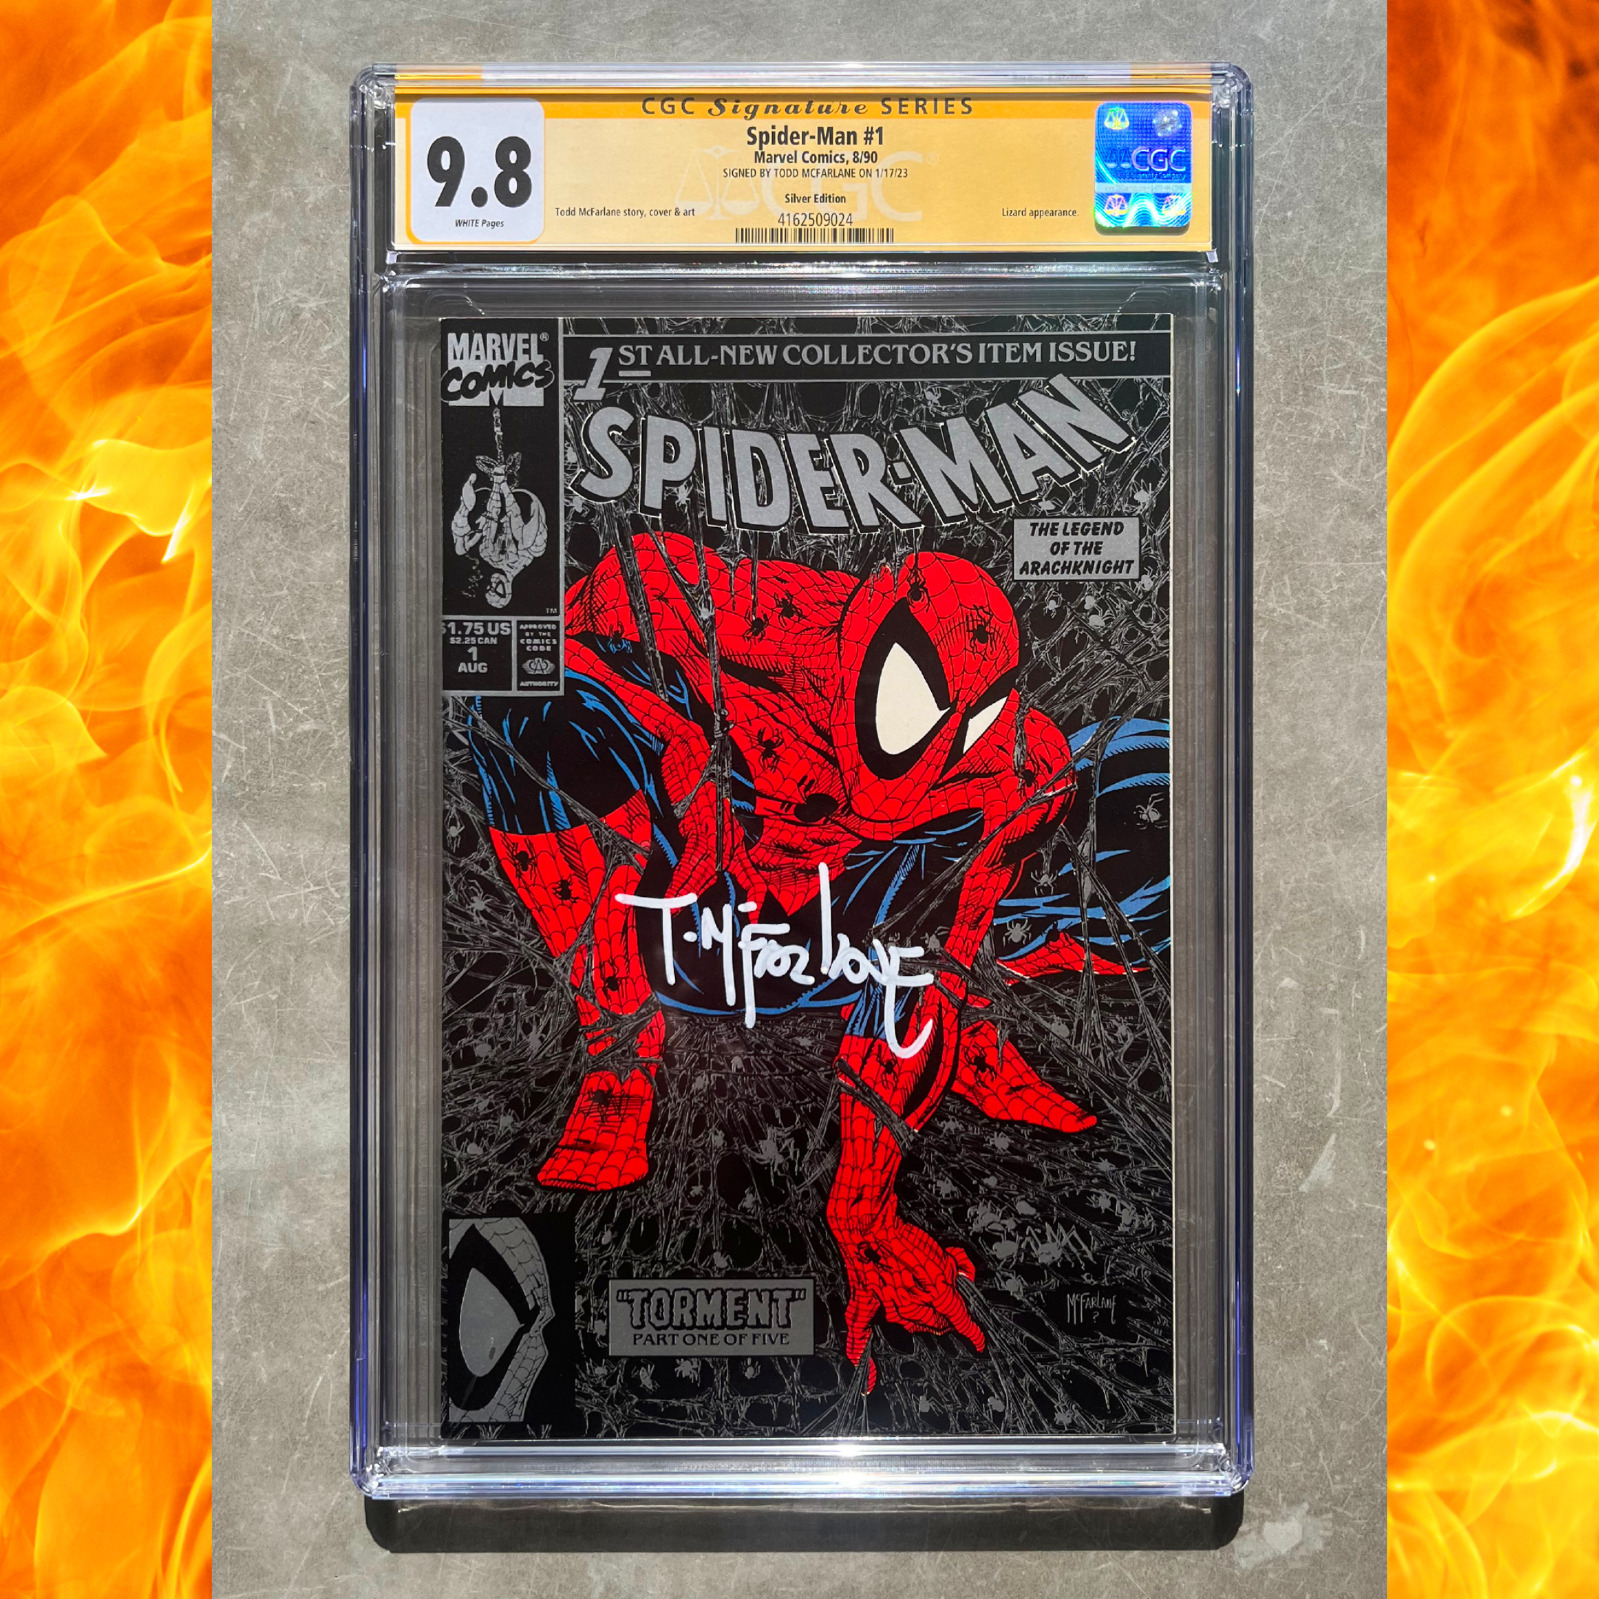 🔥 Spider-Man #1 CGC 9.8 Signed By Todd McFarlane – Iconic Silver Edition 🔥